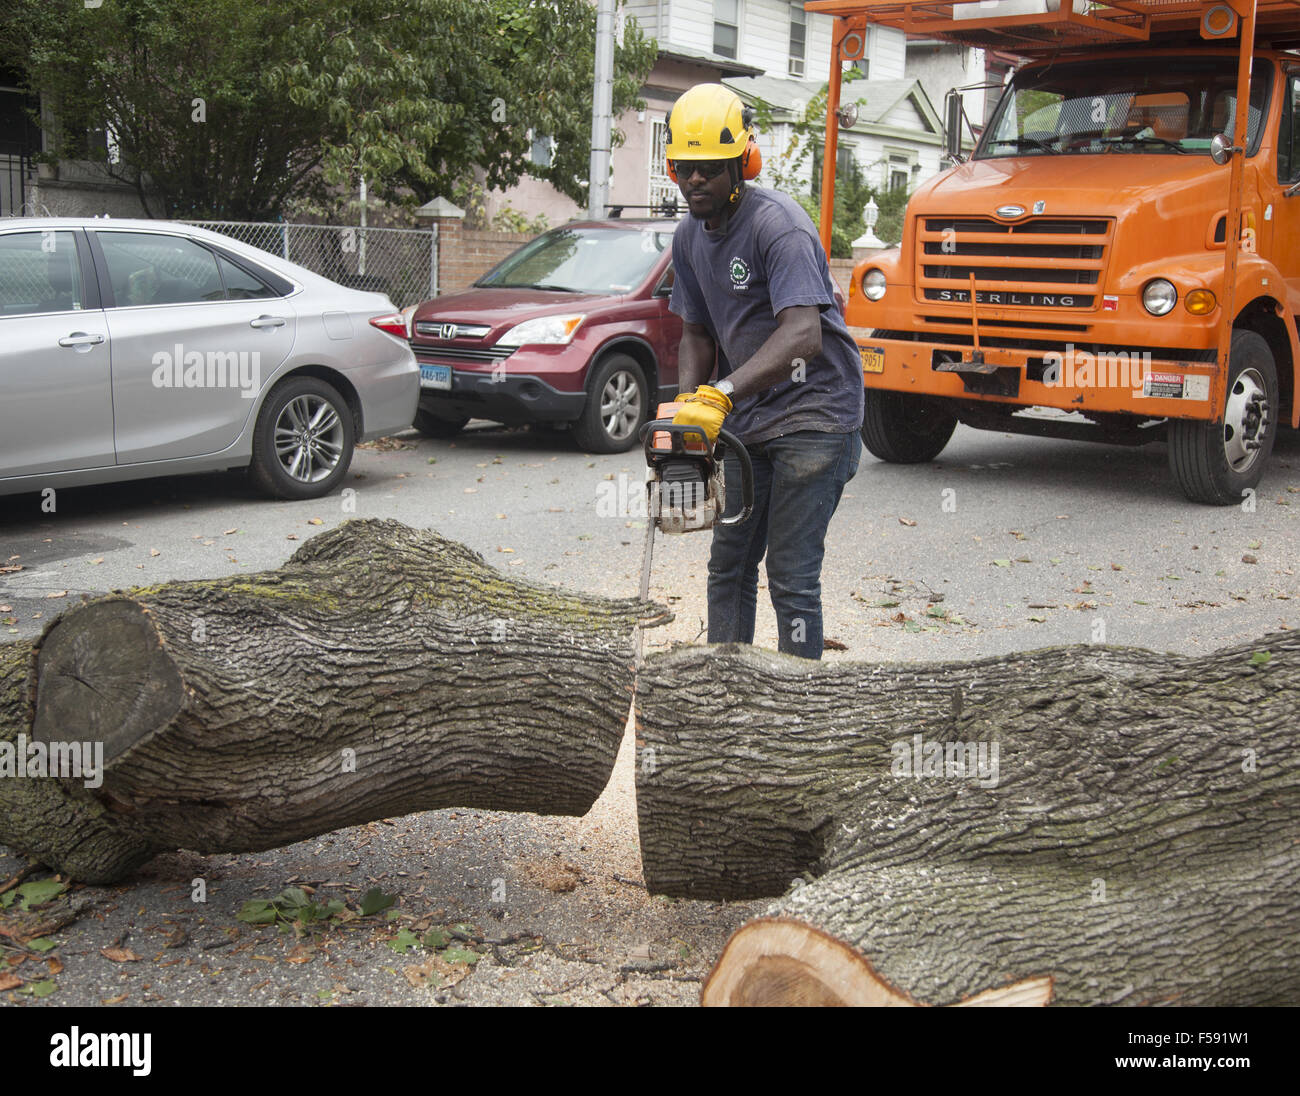 NYC tree removal crew cut down a tree in danger of blowing over during a storm. Brooklyn, NY. Stock Photo